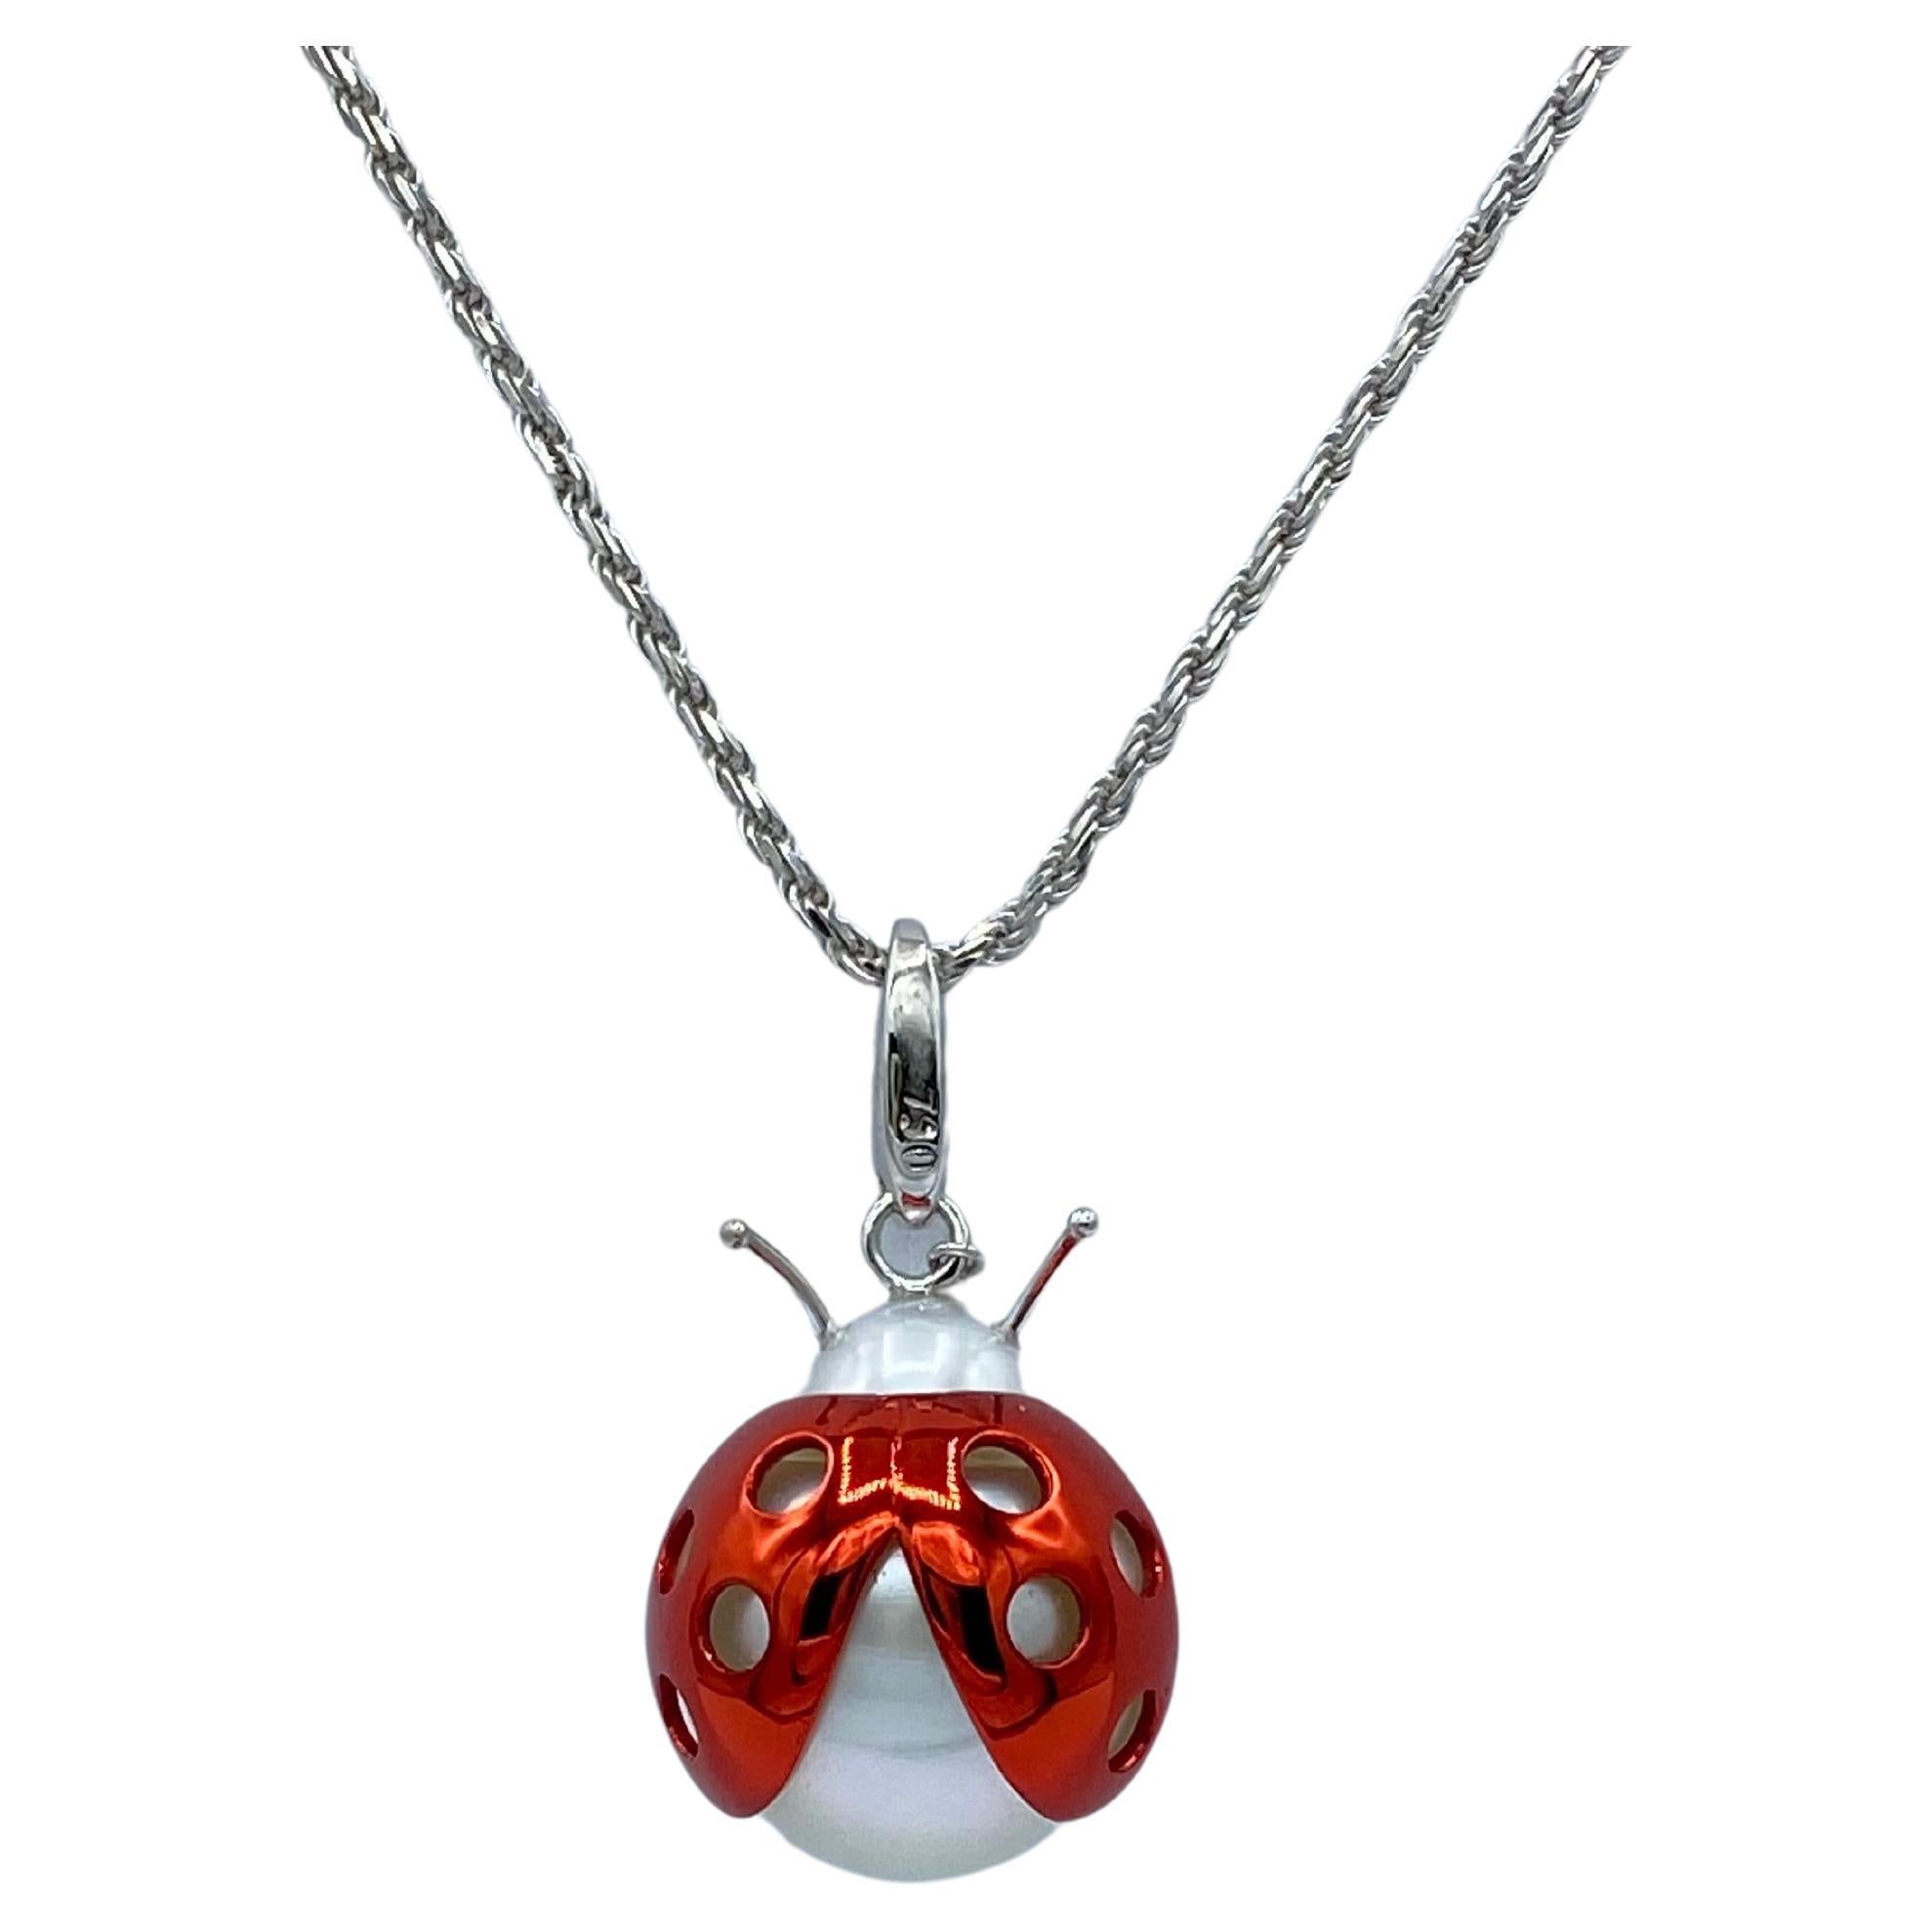 Contemporary Ladybird/Bug Australian Pearl Red White 18 Karat Gold Pendant/Necklace or Charm For Sale